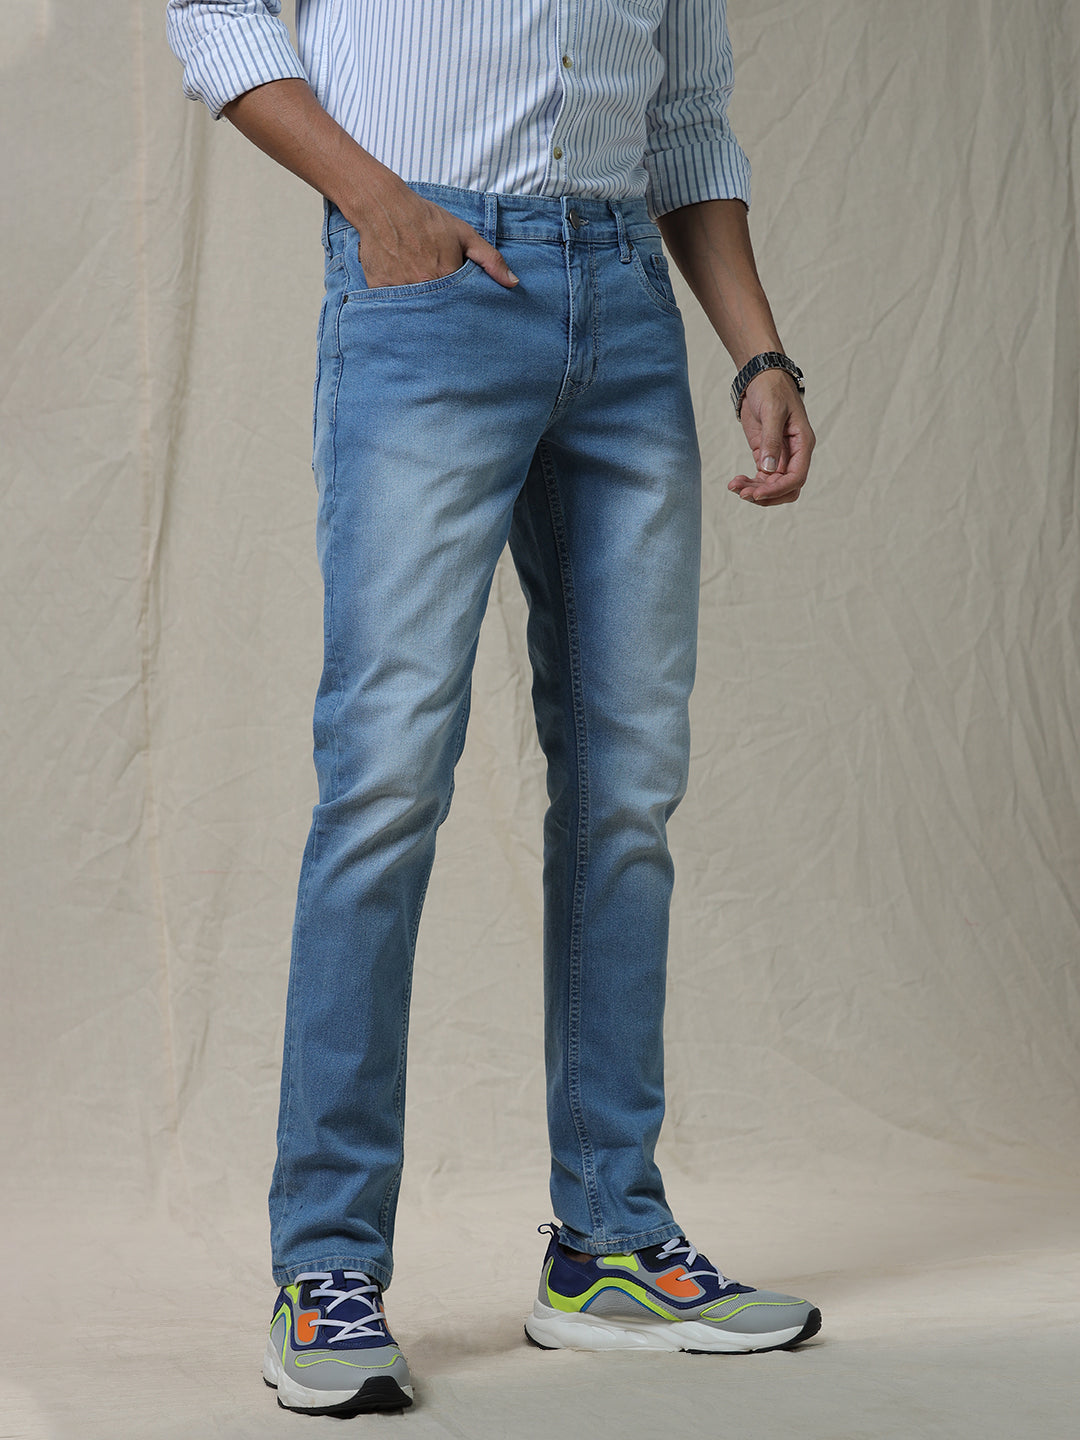 Classic Rodeo Blue Jeans